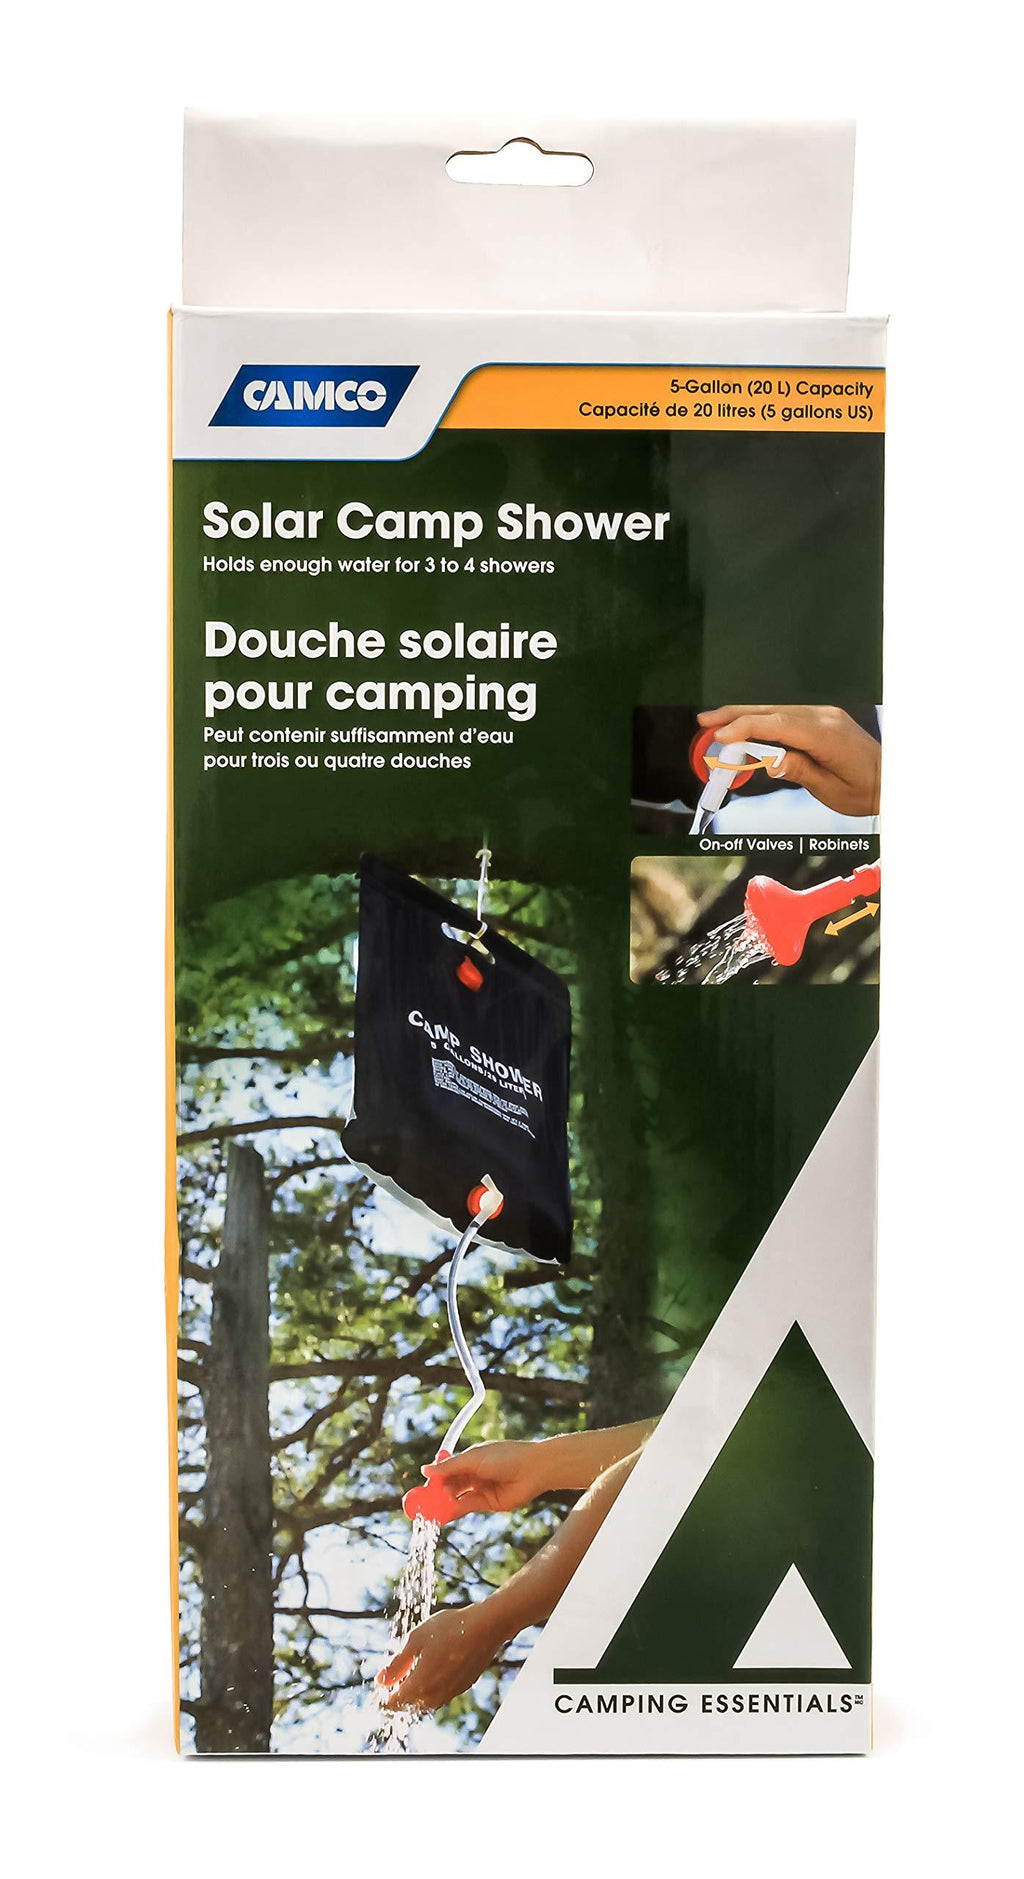  [AUSTRALIA] - Camco Outdoor Natural Solar Shower with On-Off Valve for Campsites - Holds 5 Gallons of Water, Sufficient for 3-4 Showers, Excellent for Camping, Hiking, RVing, and Traveling (51368), White